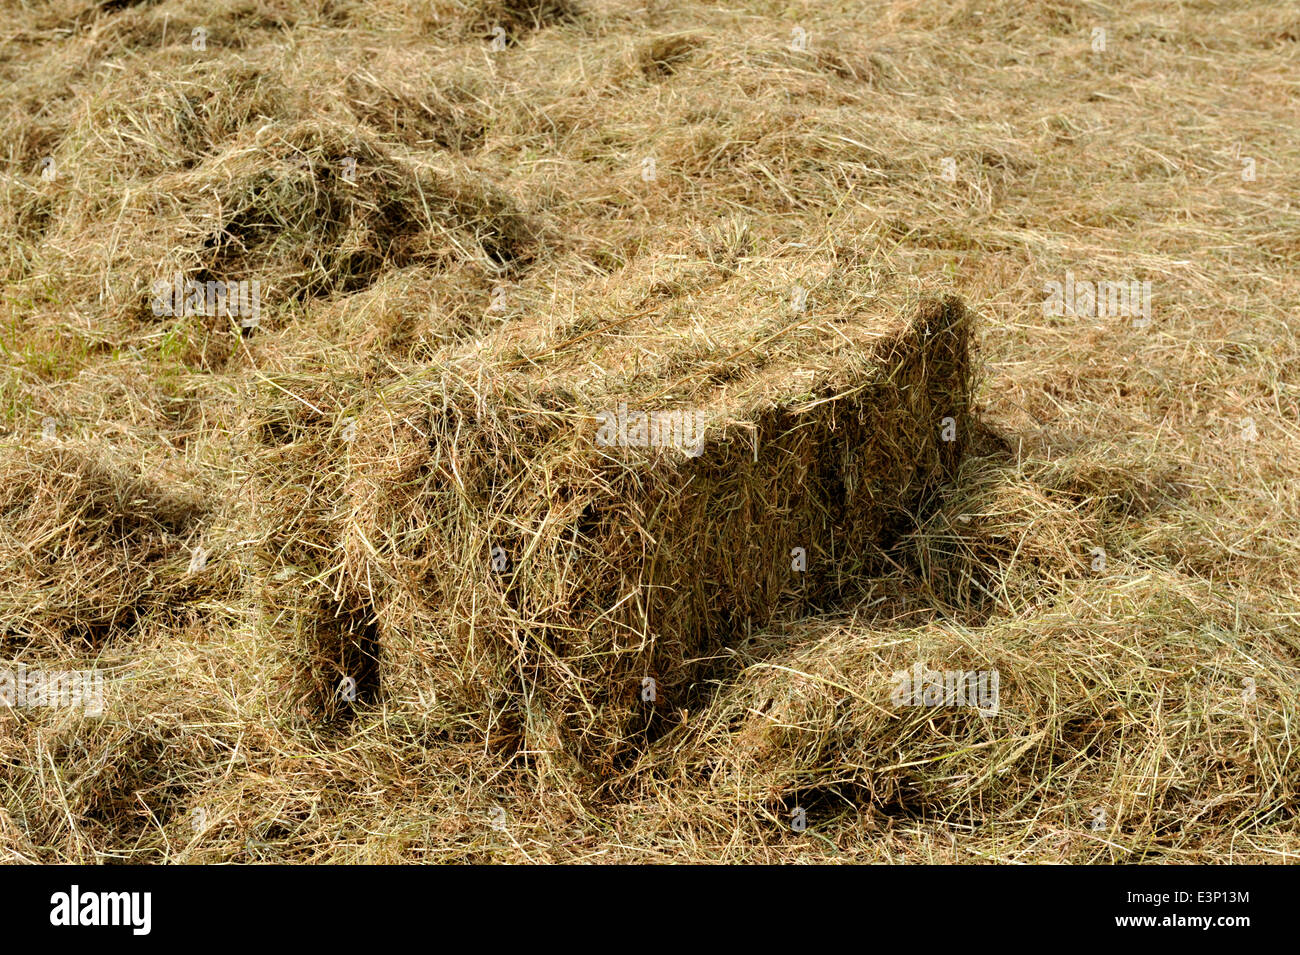 Older style, small rectangular bail of hay in field of new cut grass Stock Photo